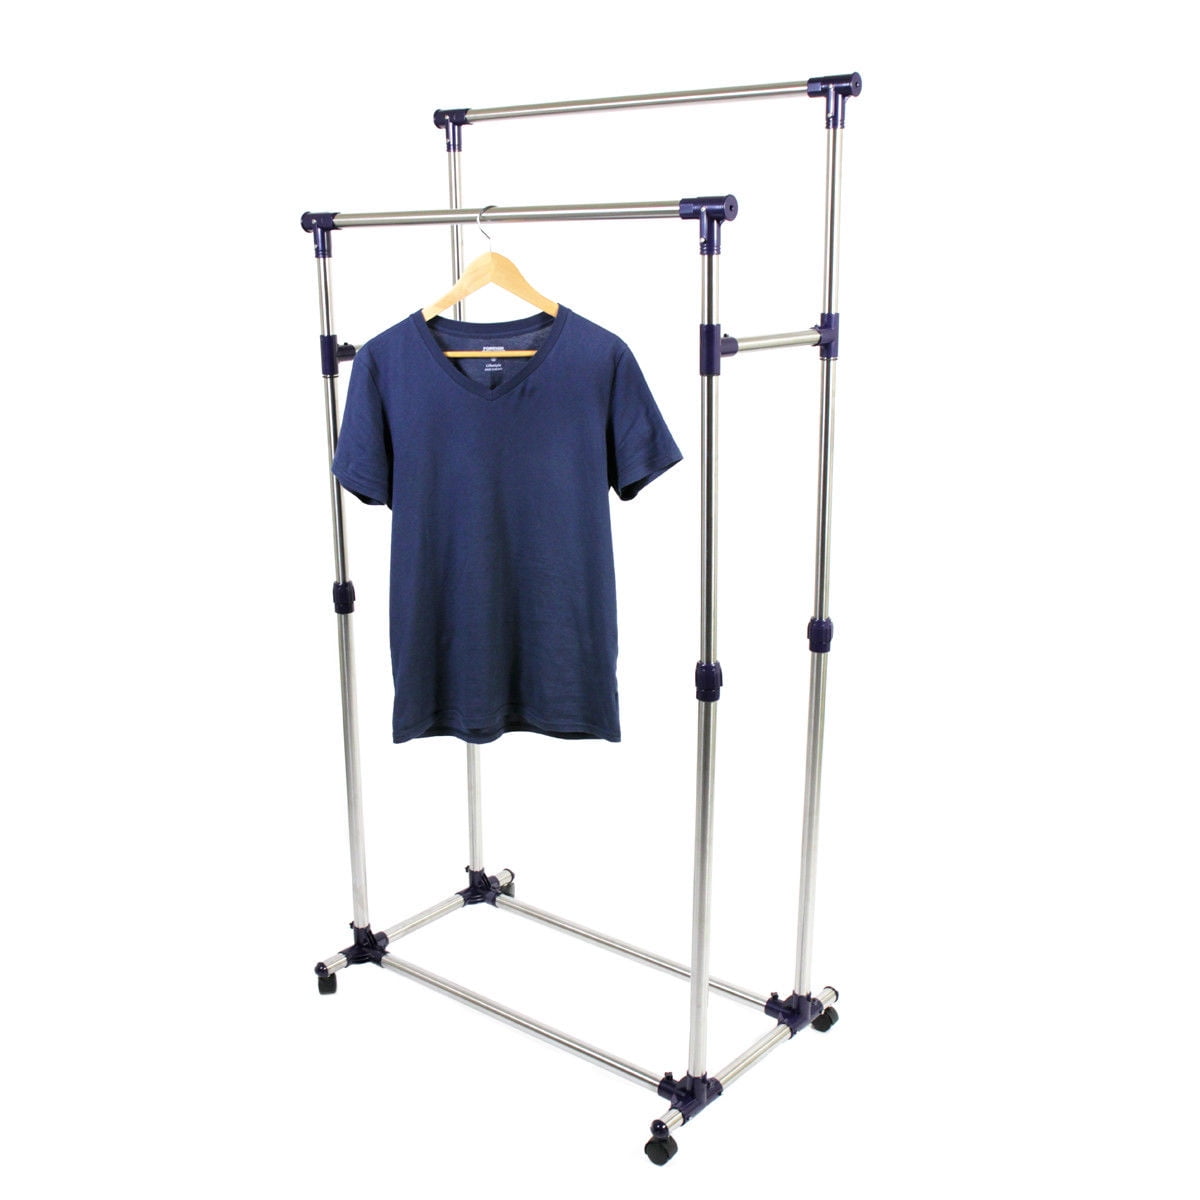 LEHOM G1 Heavy Duty Clothes Rack, 3 Tiers Rolling Garment Rack for Hanging  Clothes, Adjustable Wire Clothing Rack with Storage Shelves, Lockable